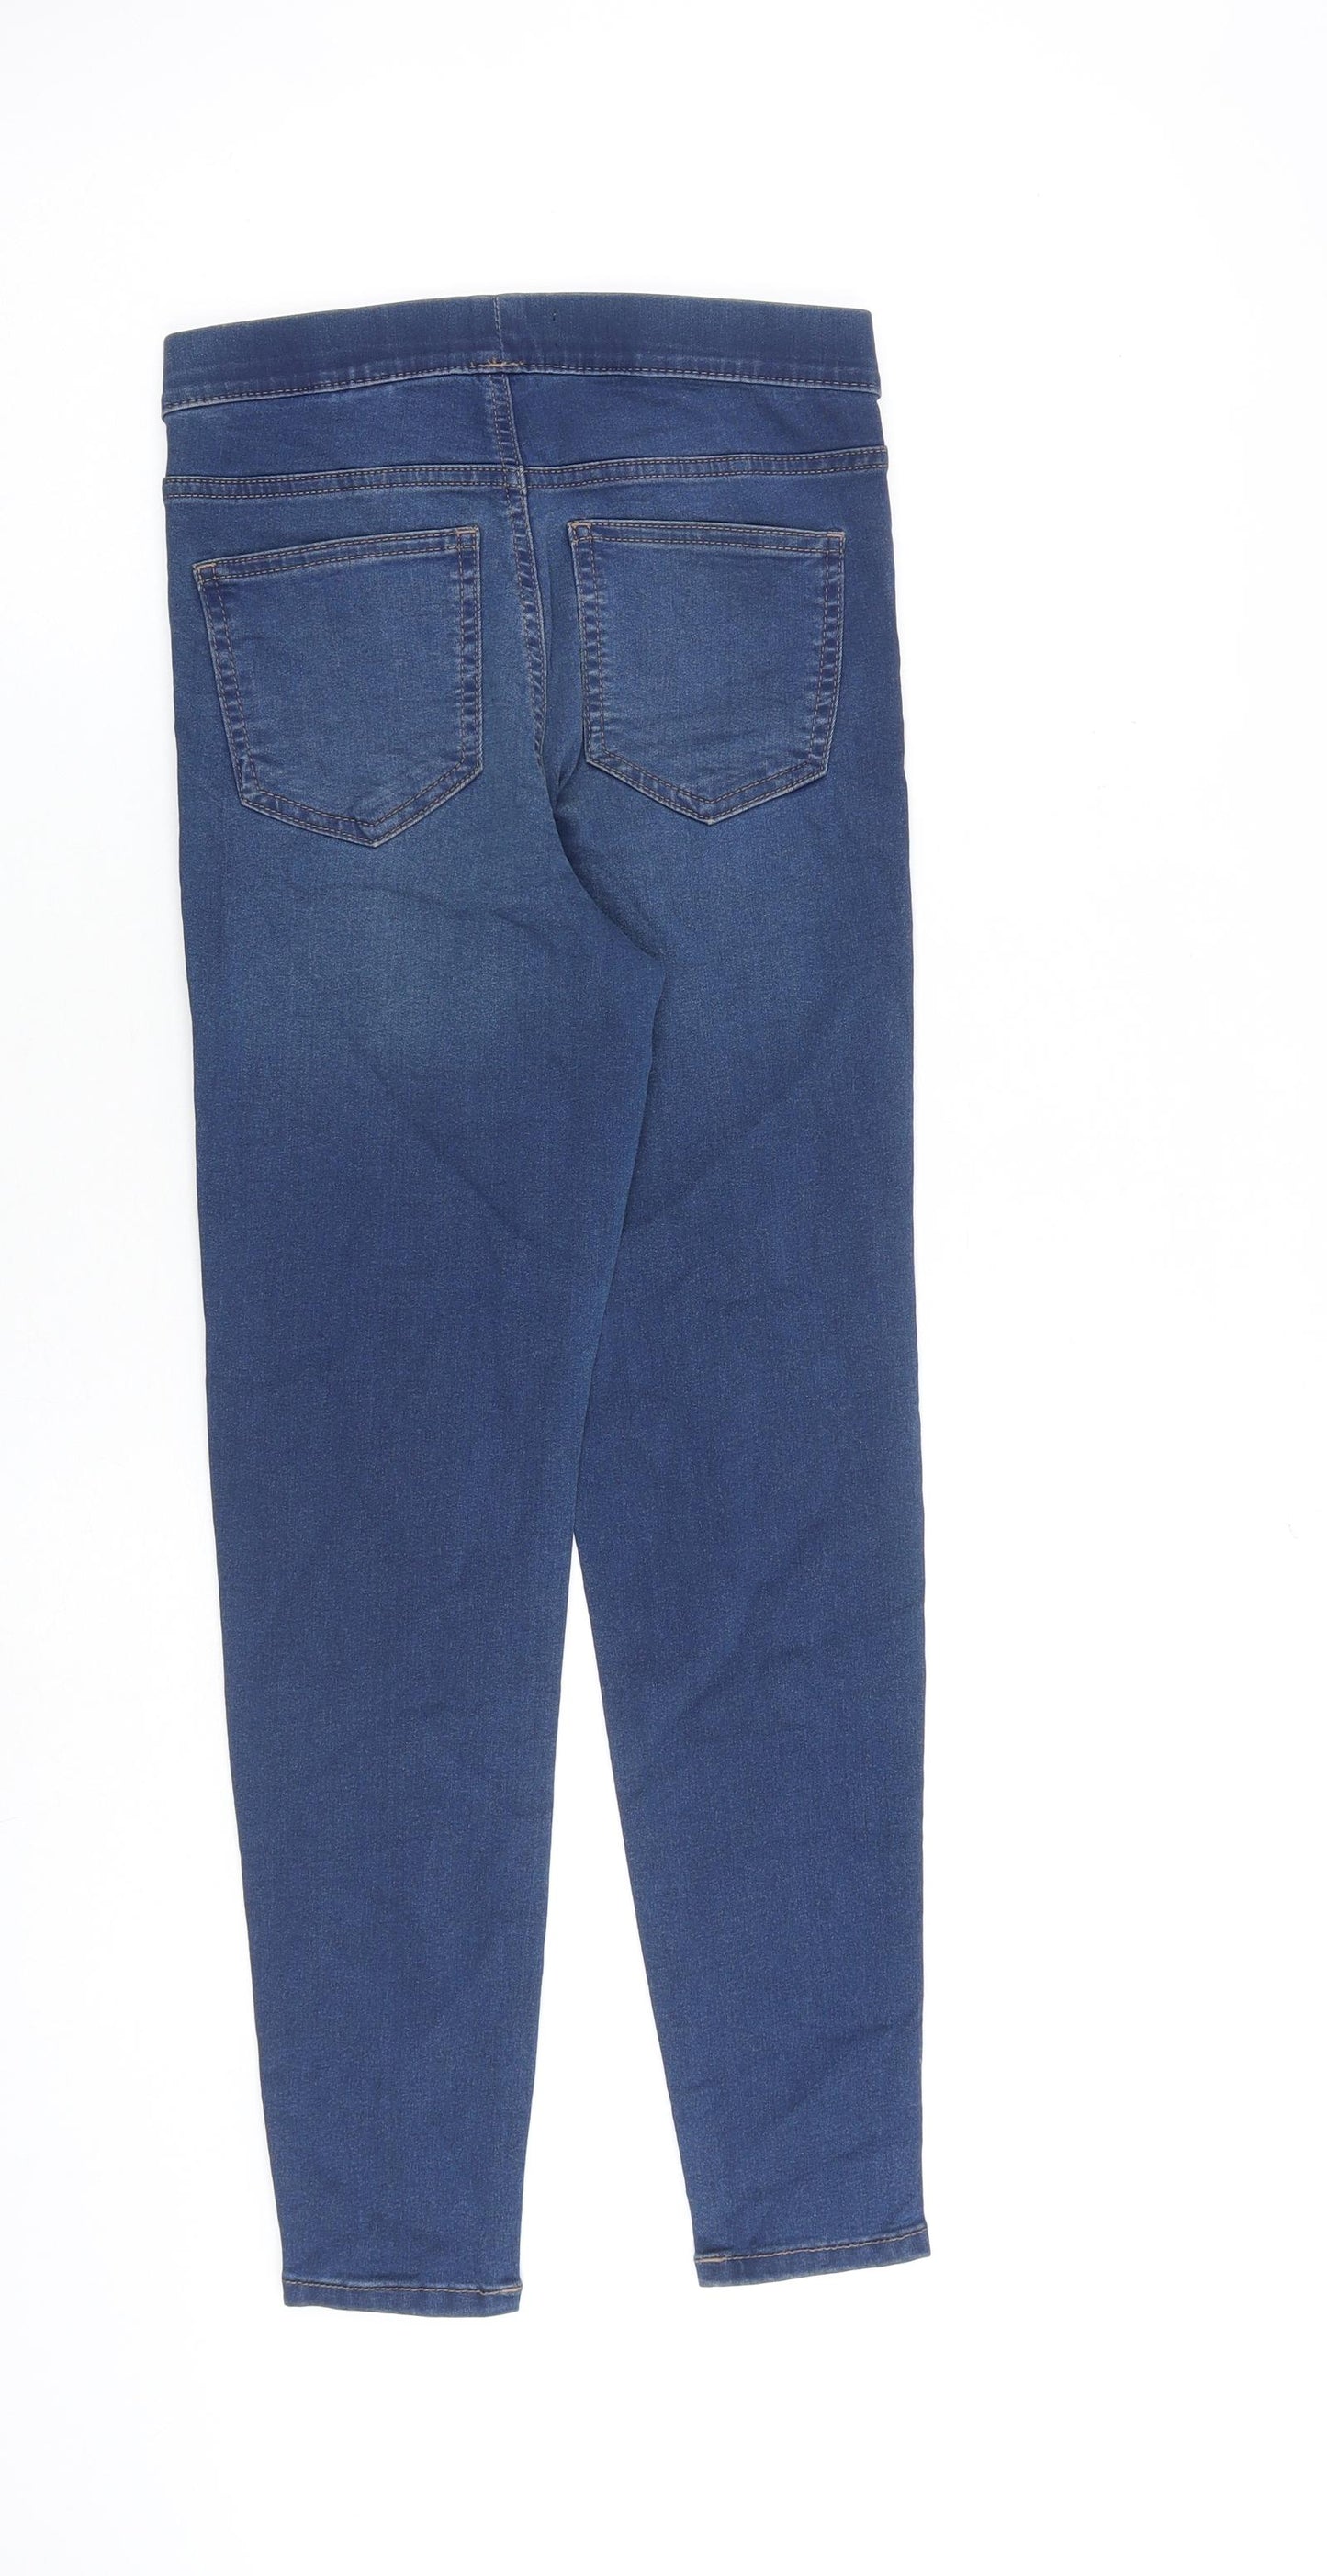 Marks and Spencer Womens Blue Cotton Jegging Jeans Size 6 L26 in Regular